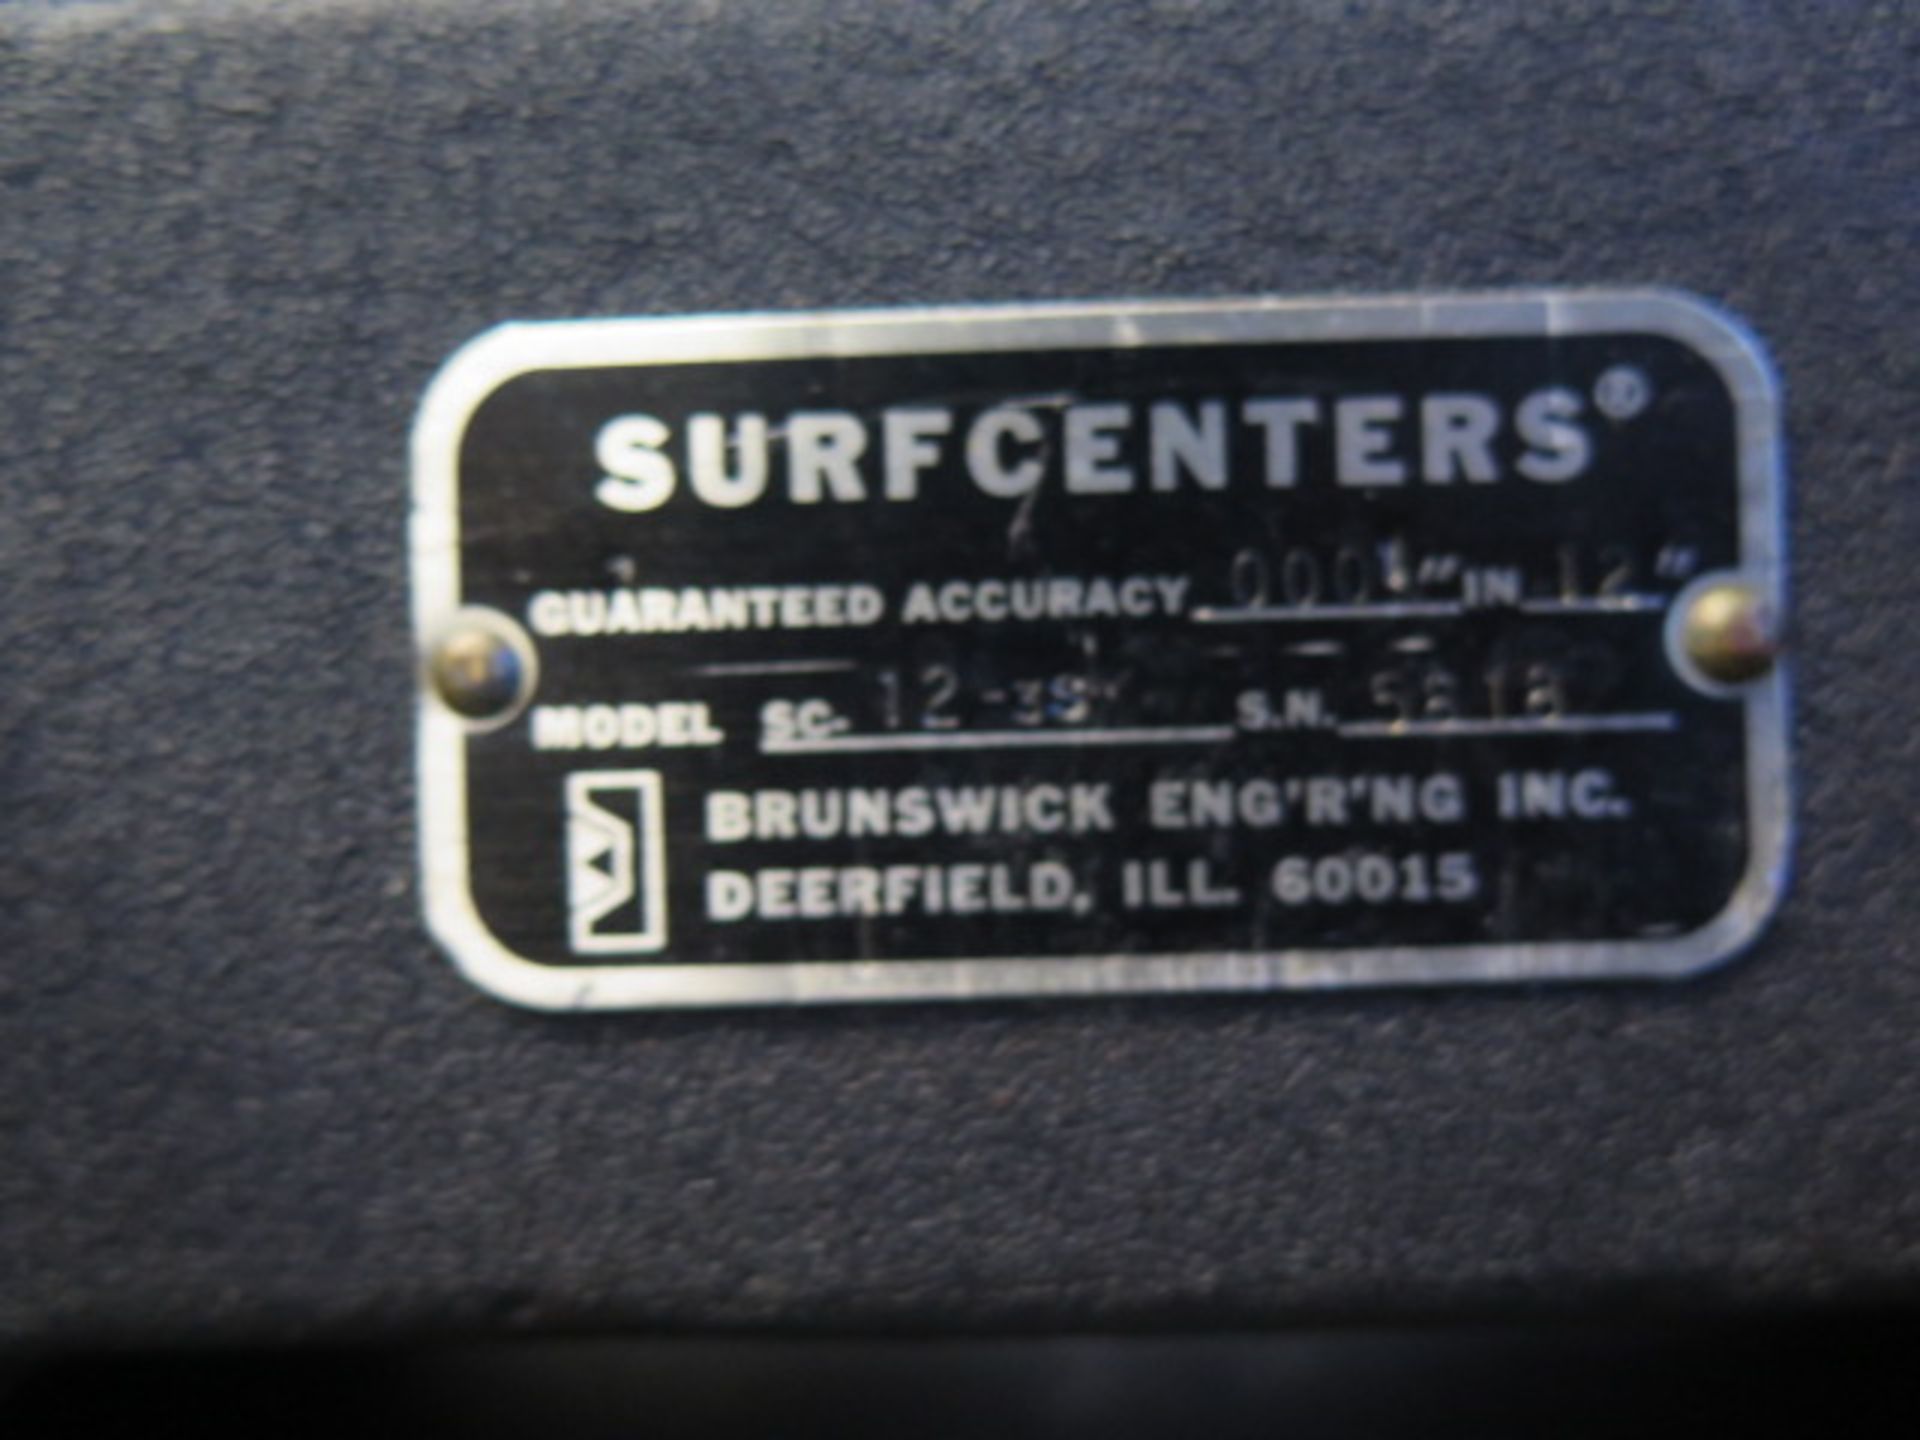 Surfcenters 4" x 3" Bench Center (SOLD AS-IS - NO WARRANTY) - Image 4 of 4